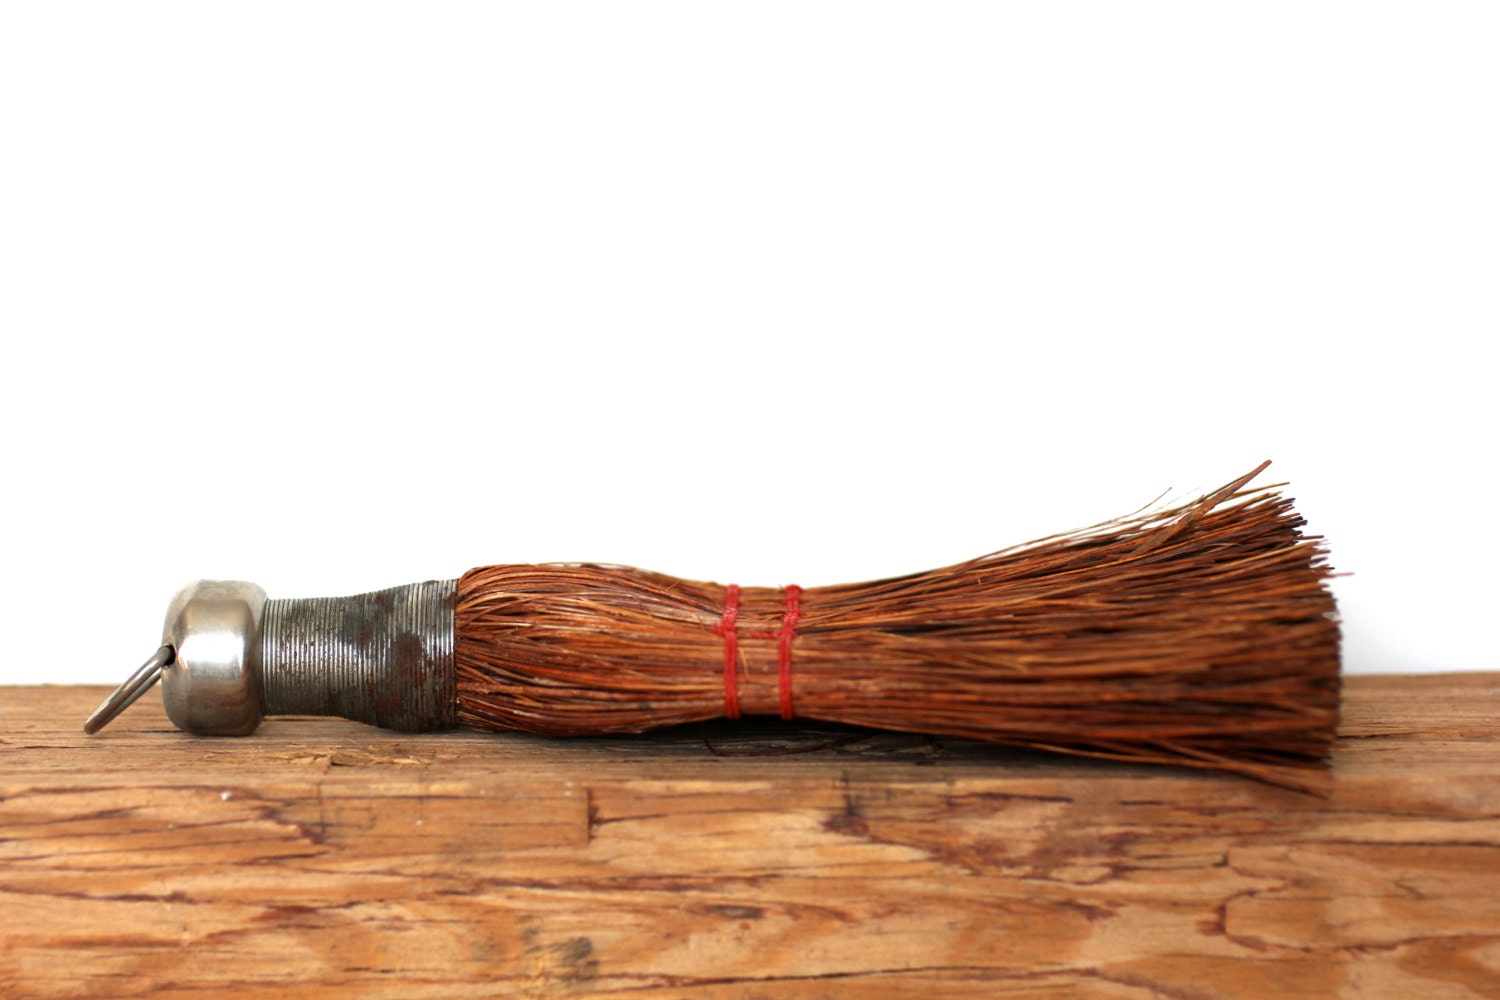 Spring Cleaning - Vintage Whisk Broom - Broom - Brown - Poppy Red - Red - Clean - Chores - Rustic - Bristles - attentionvintage